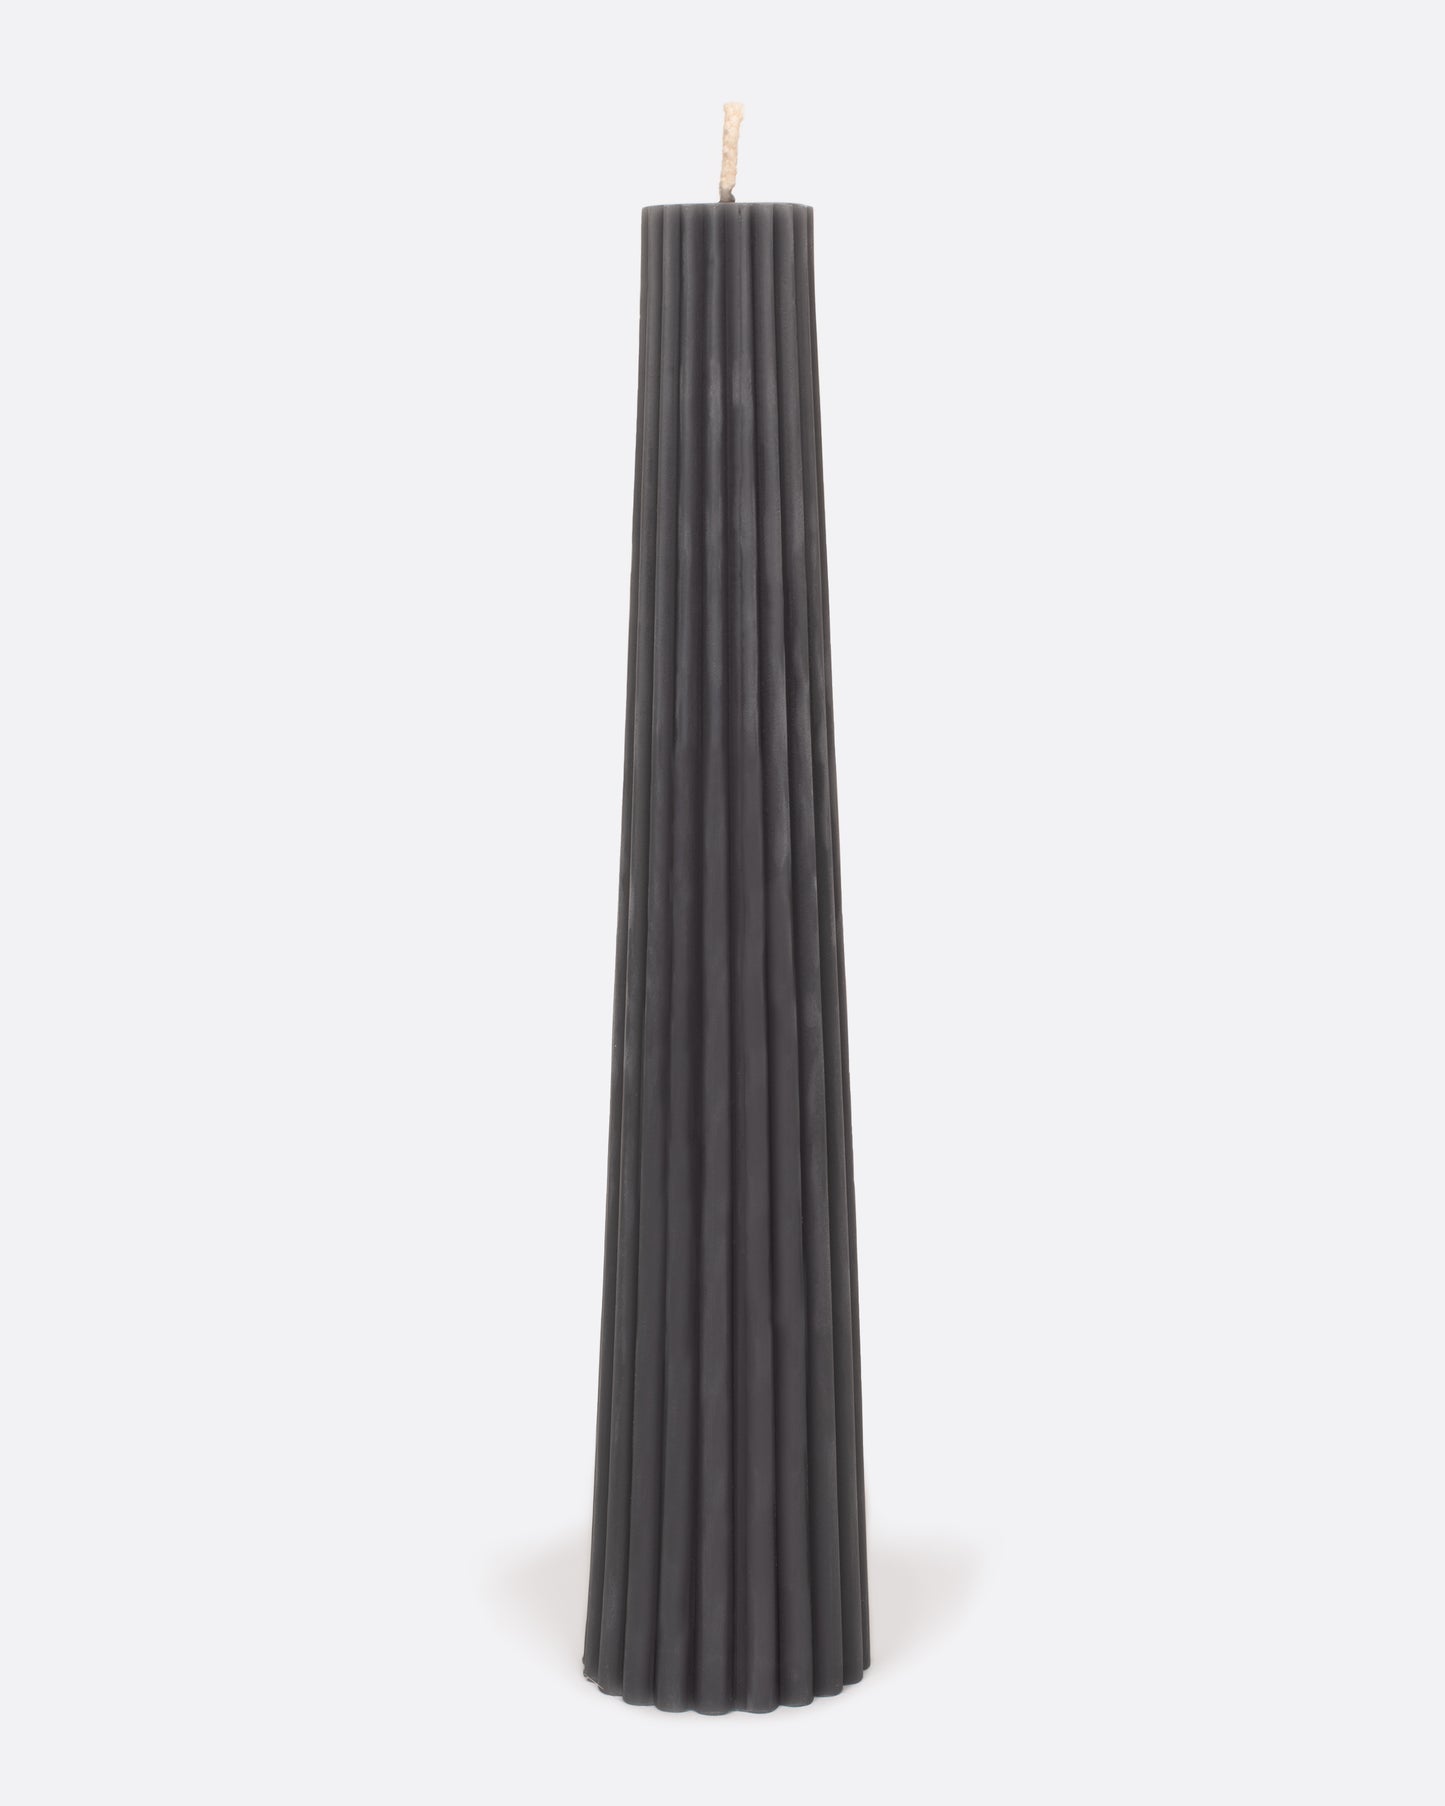 Charcoal gray fluted pillar candle, shown standing.